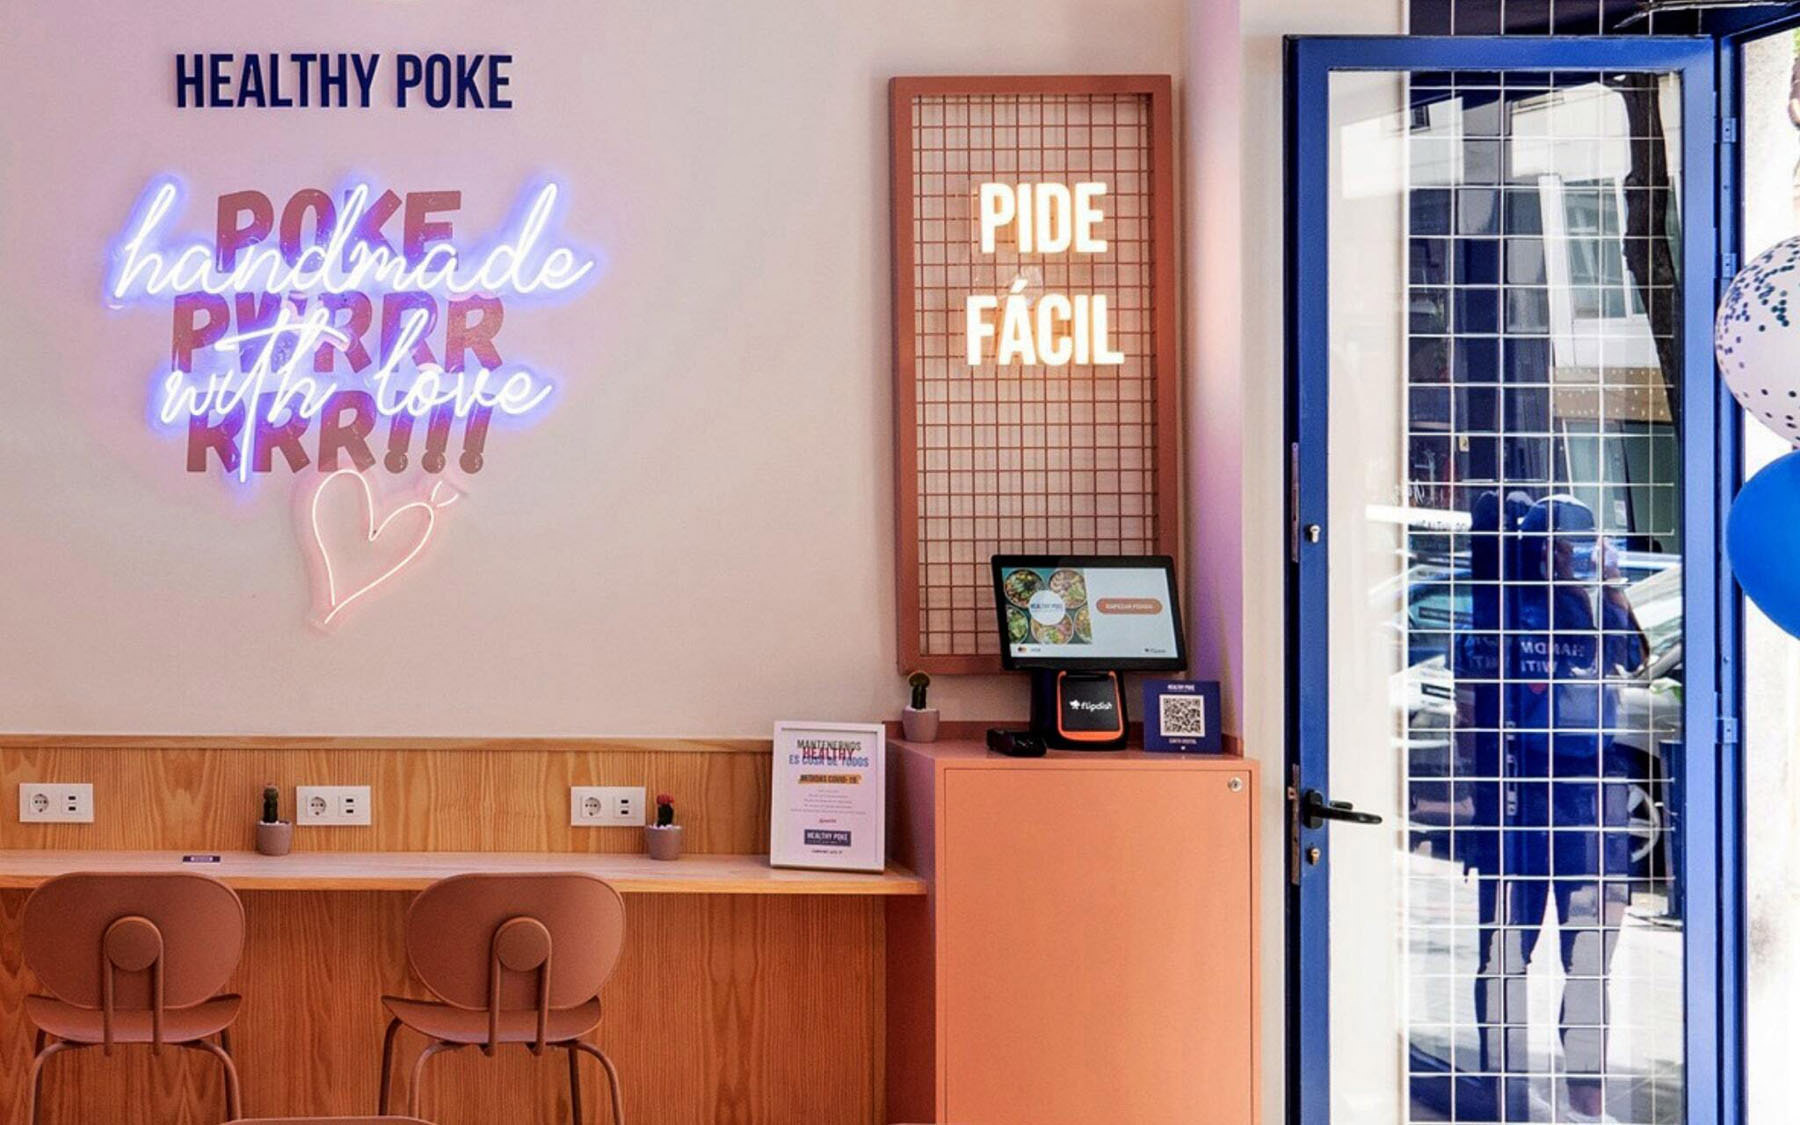 Meet Healthy Poke, a 26-outlet restaurant chain with a cutting-edge digital approach